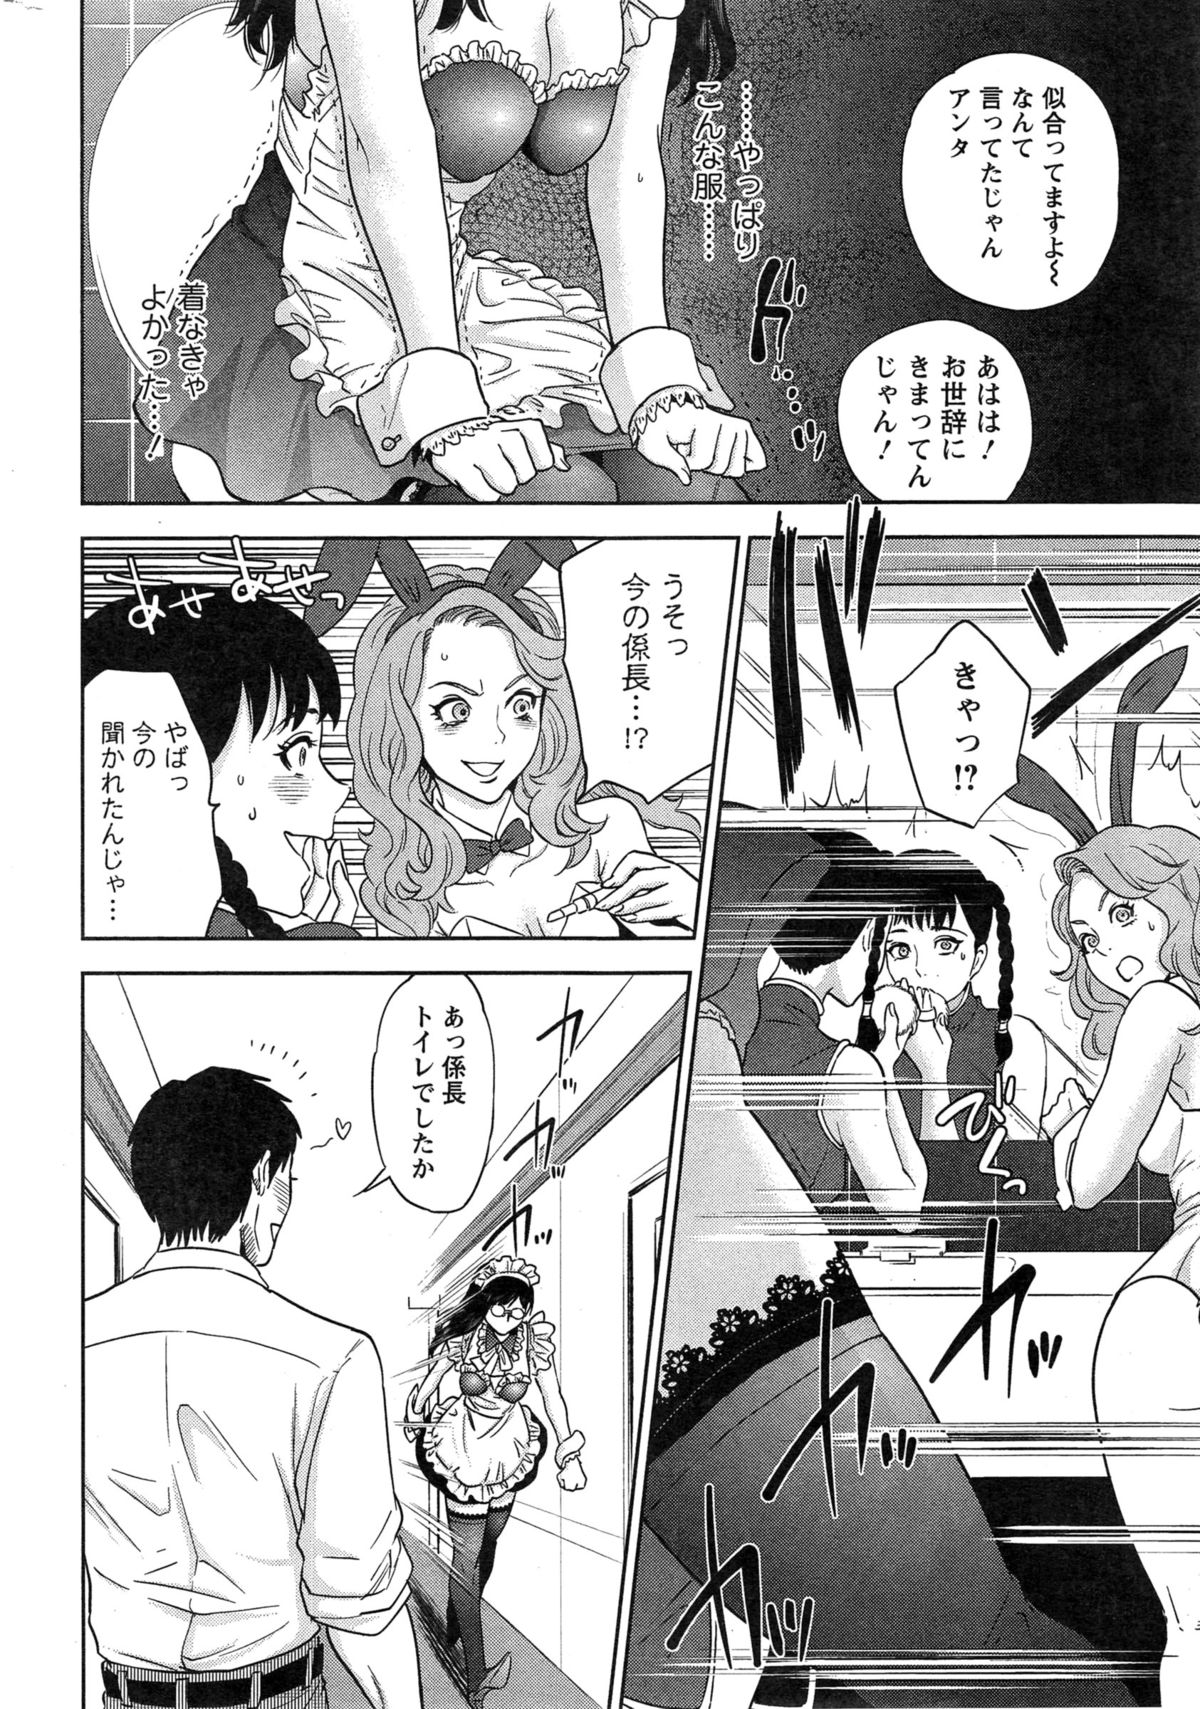 Action Pizazz Cgumi 2015-02 page 14 full